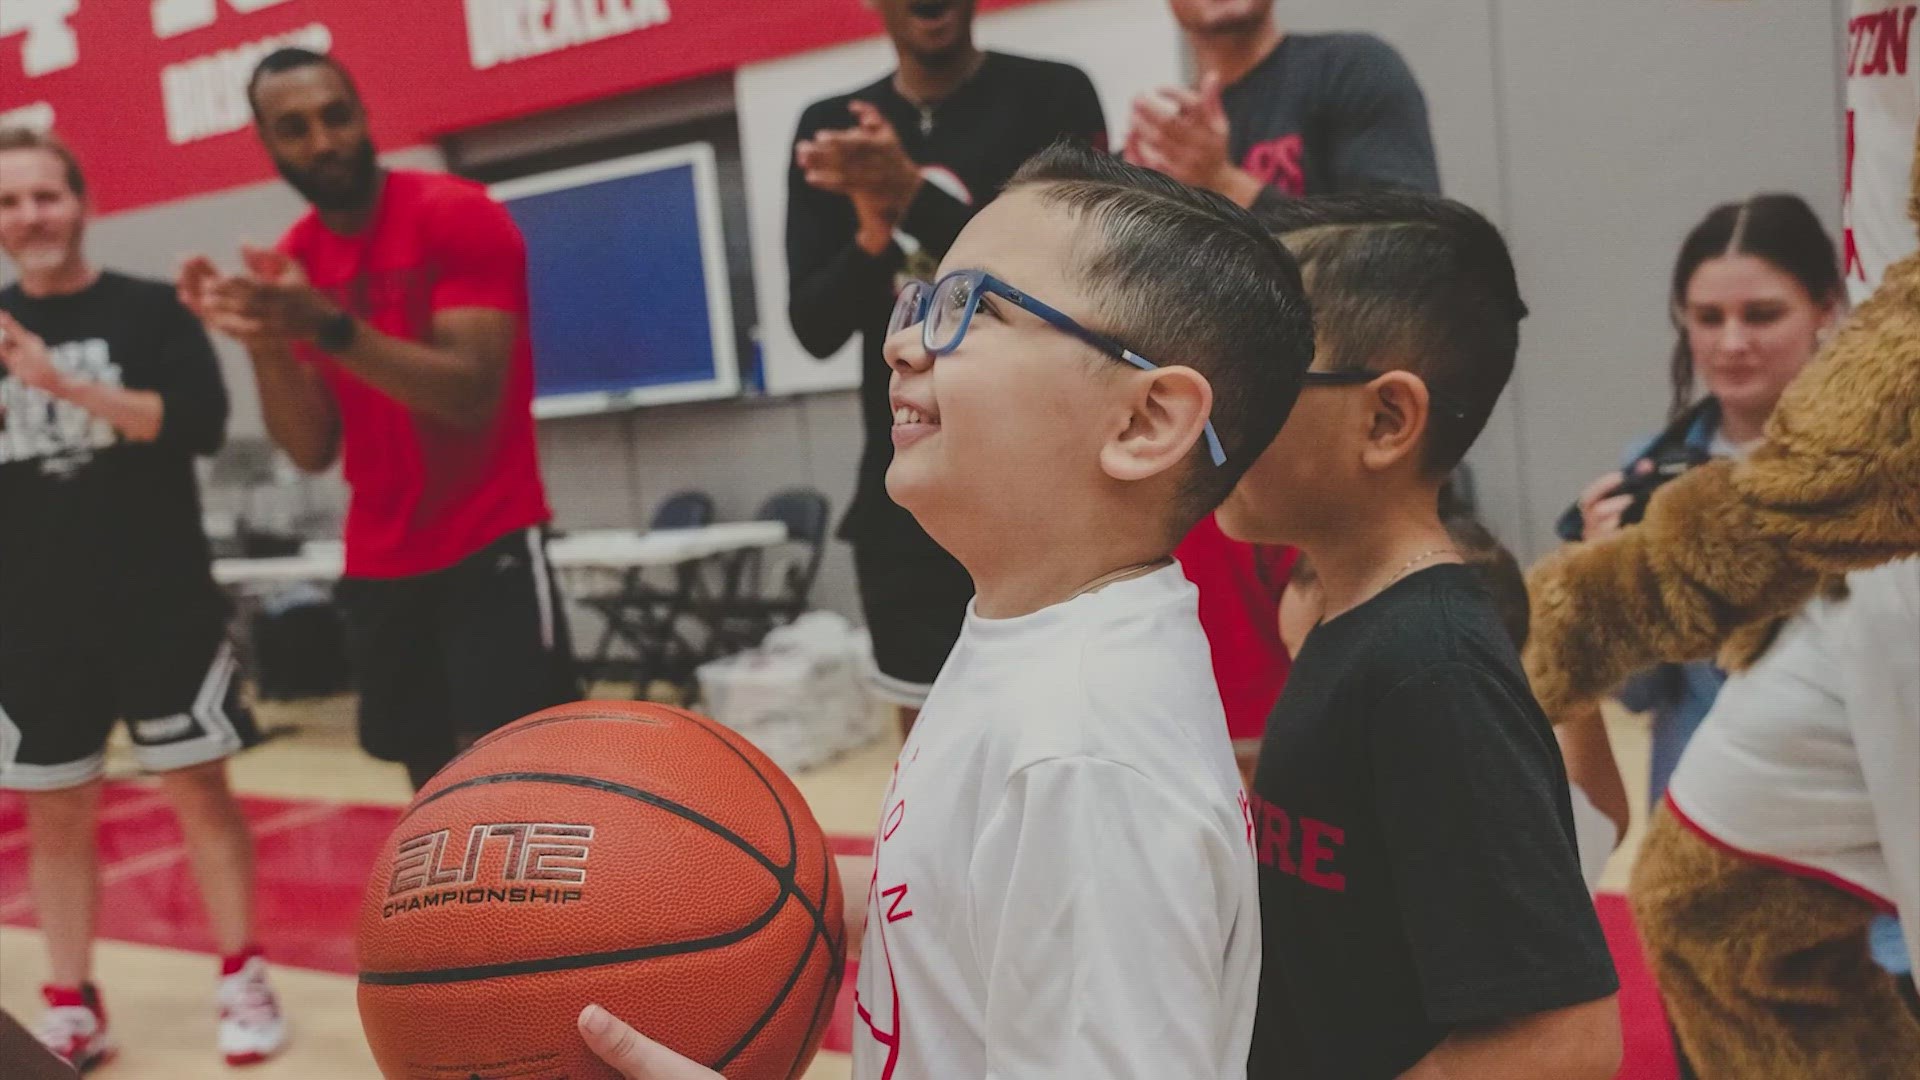 He may not stand that tall, but this 11-year-old who's battling lupus makes his mark on the UH basketball team.